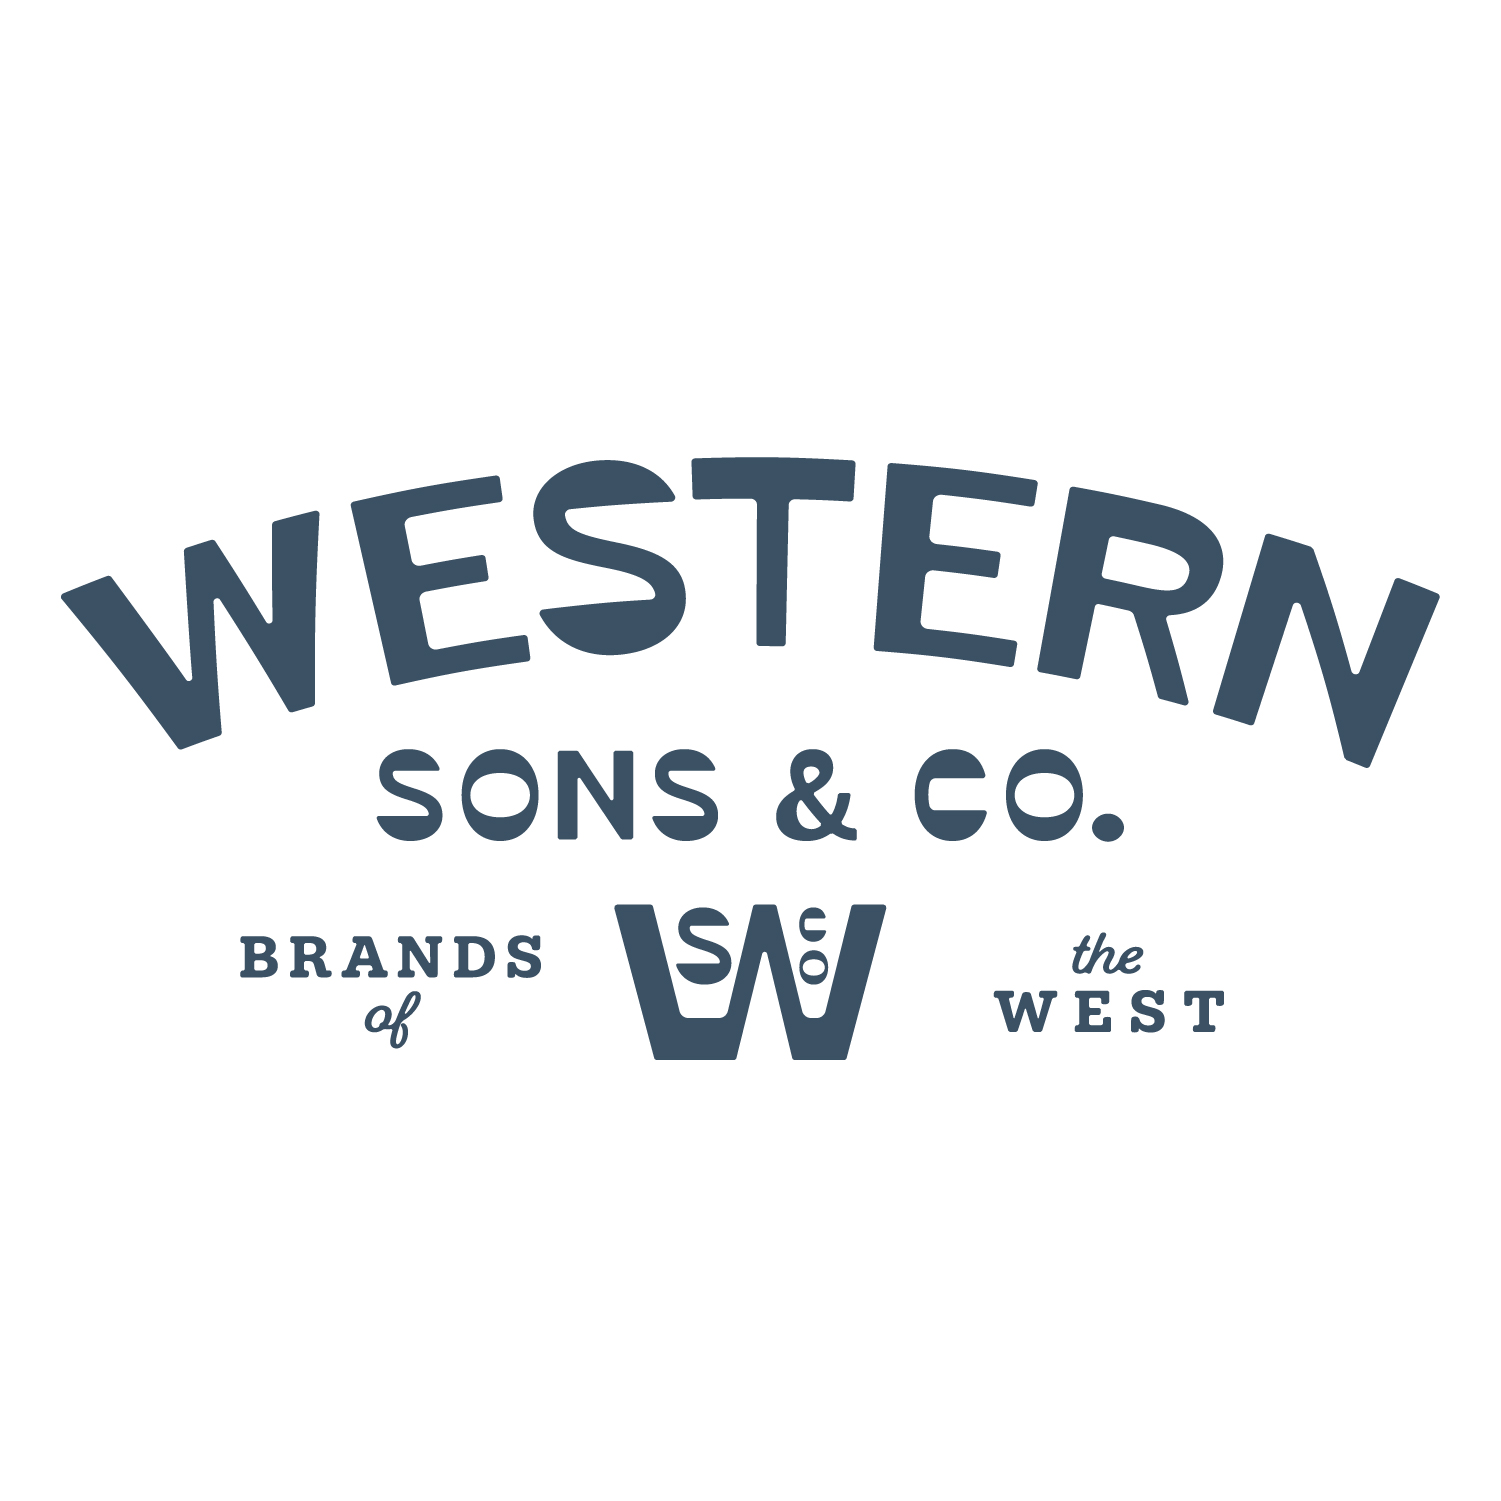 Western Sons & Co logo design by logo designer Cactus Country for your inspiration and for the worlds largest logo competition